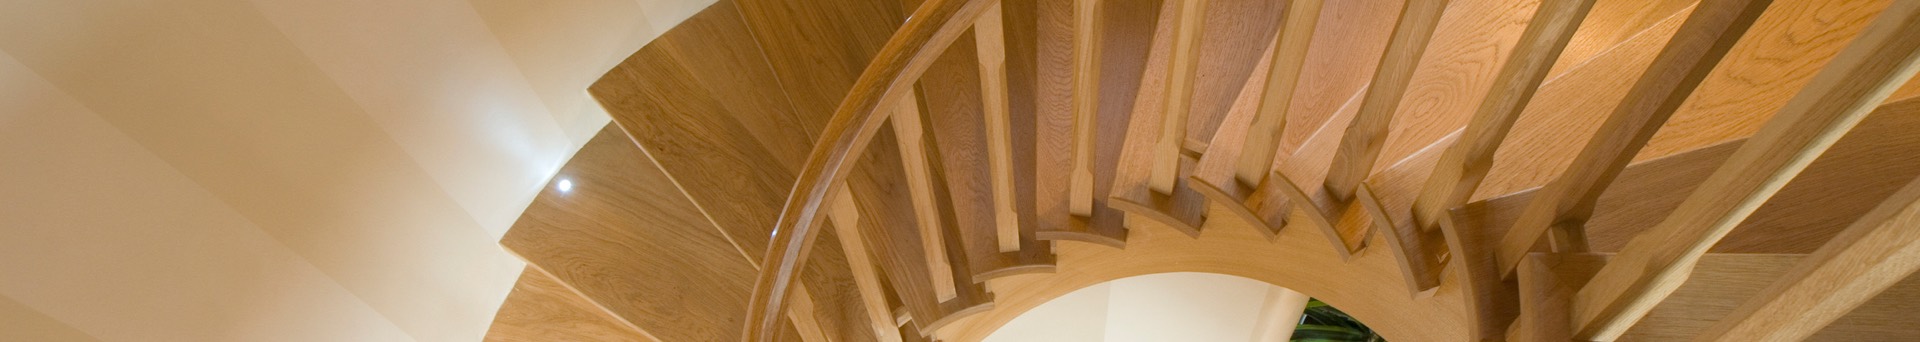 An image of a wooden spiral staircase